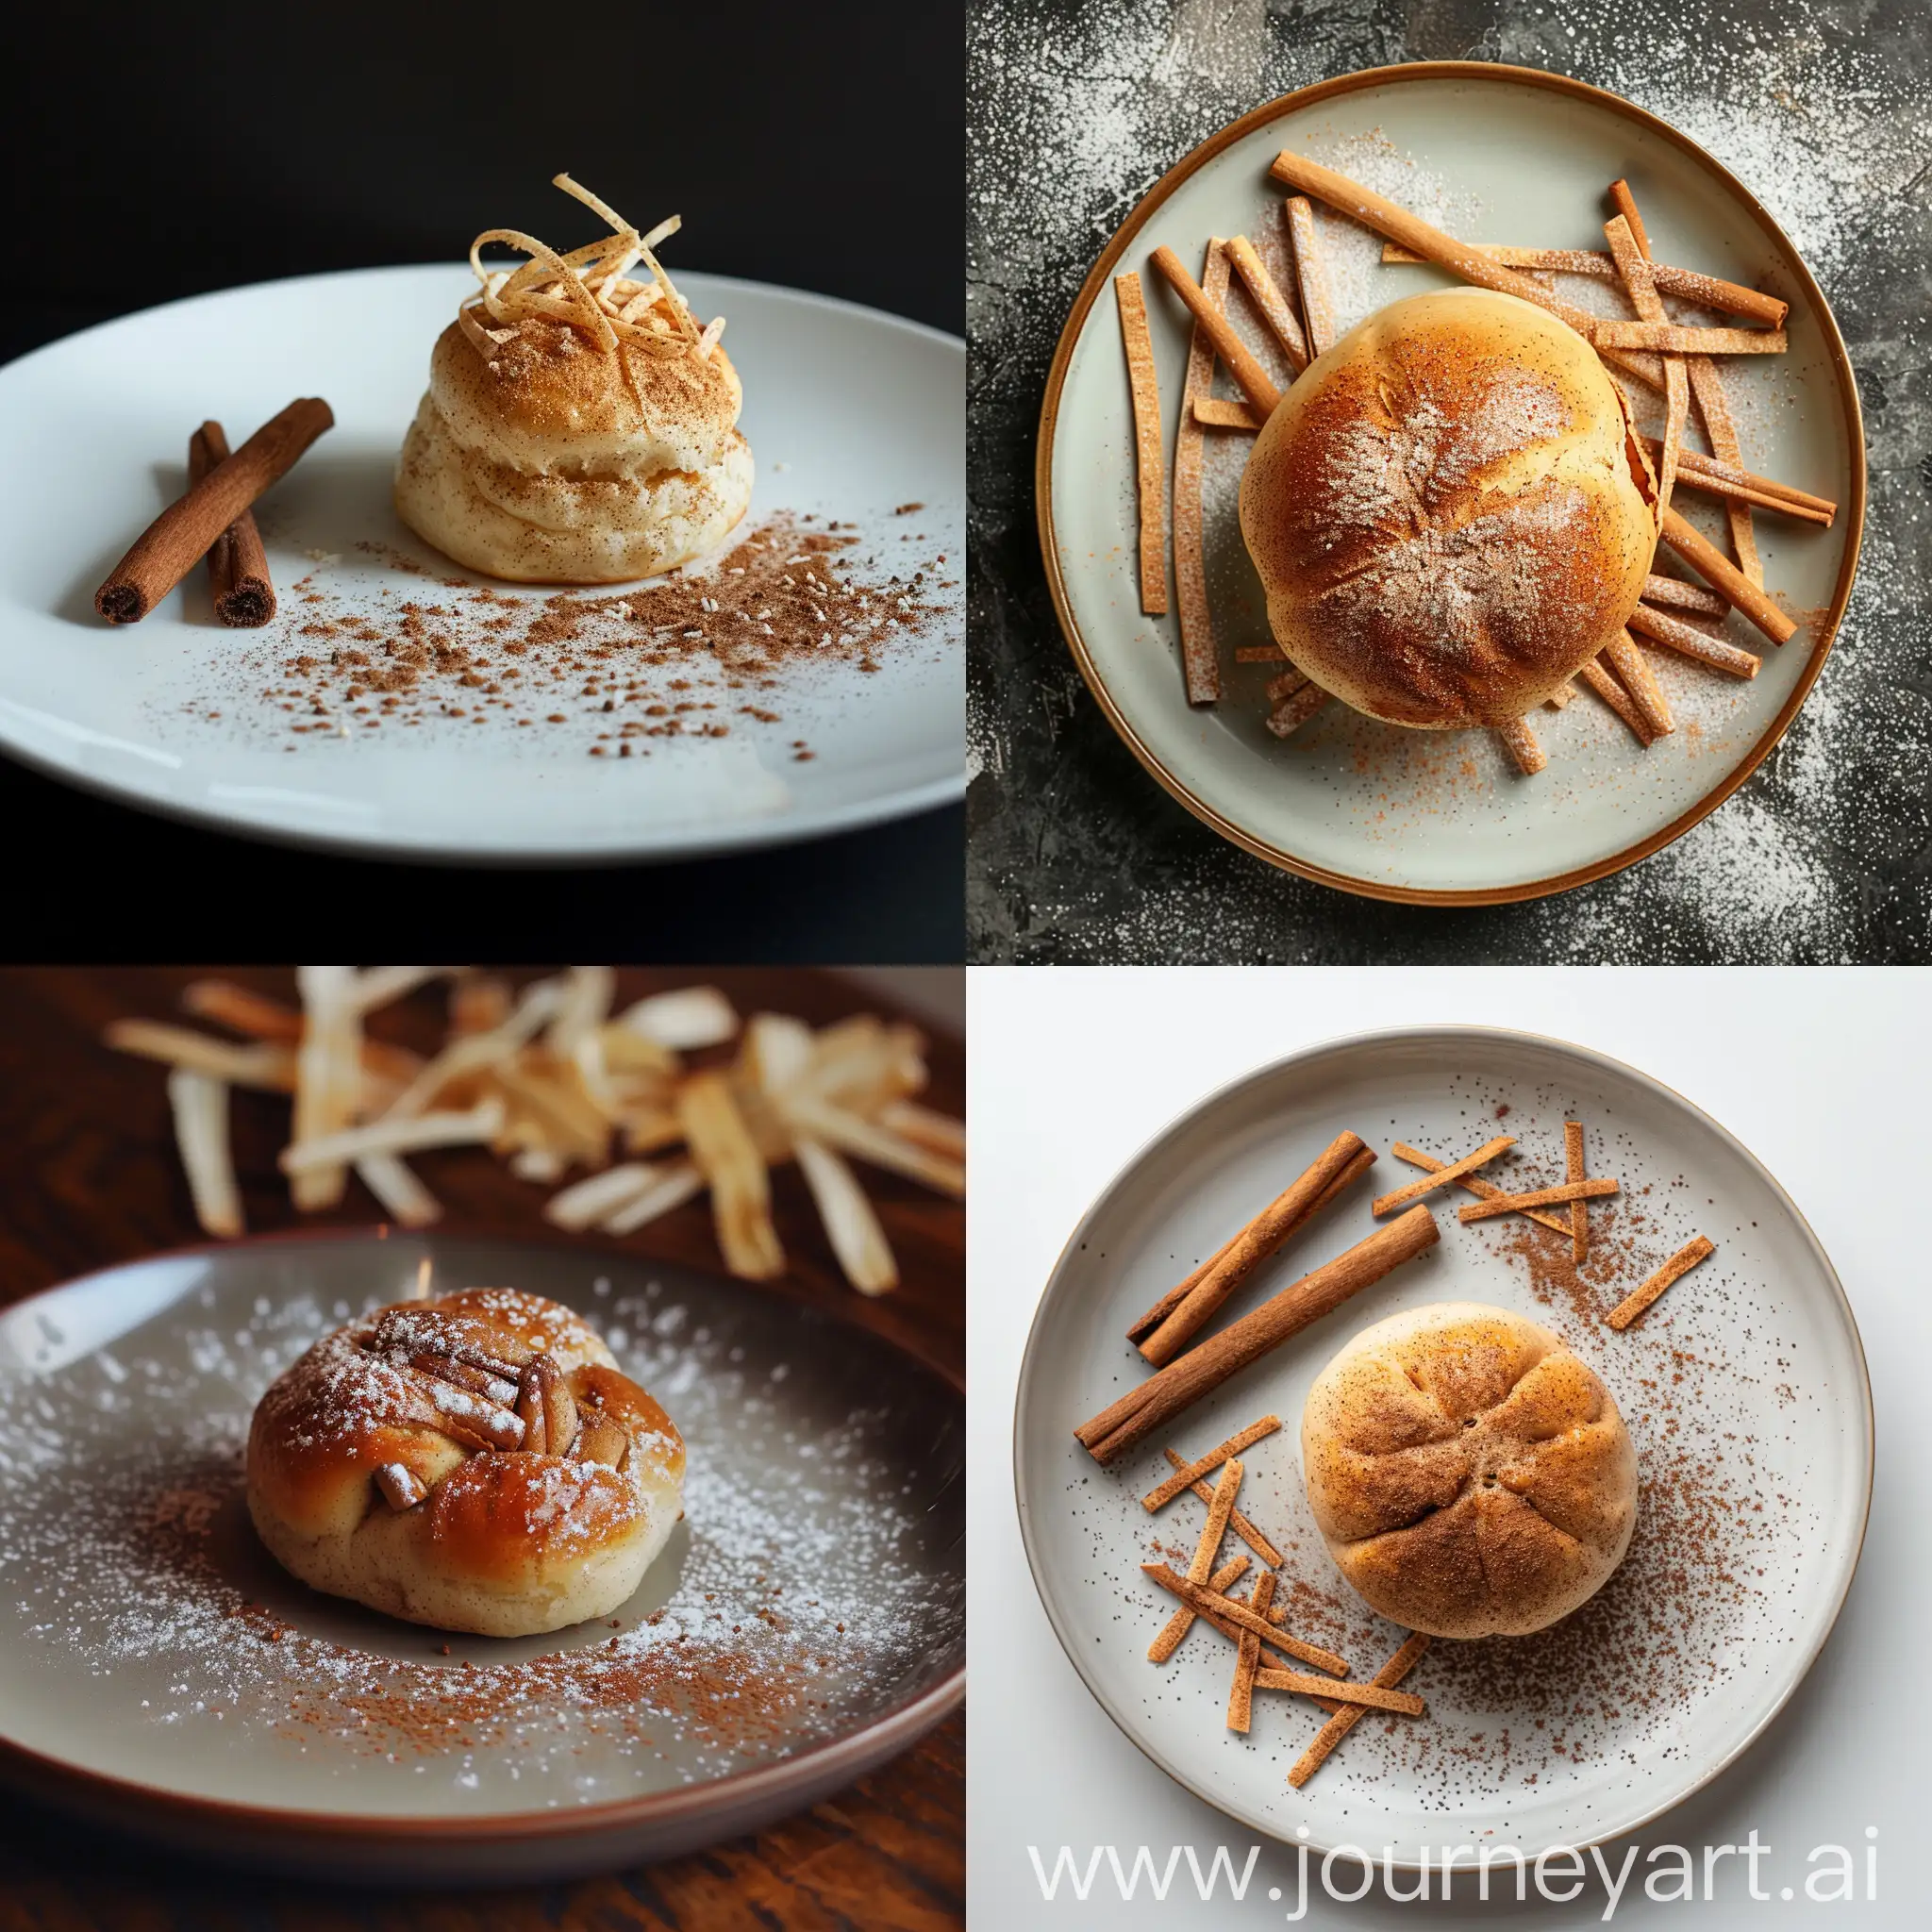 Cinnamon-Bun-with-Scattered-Cinnamon-Strips-on-Plate-Professional-Photo